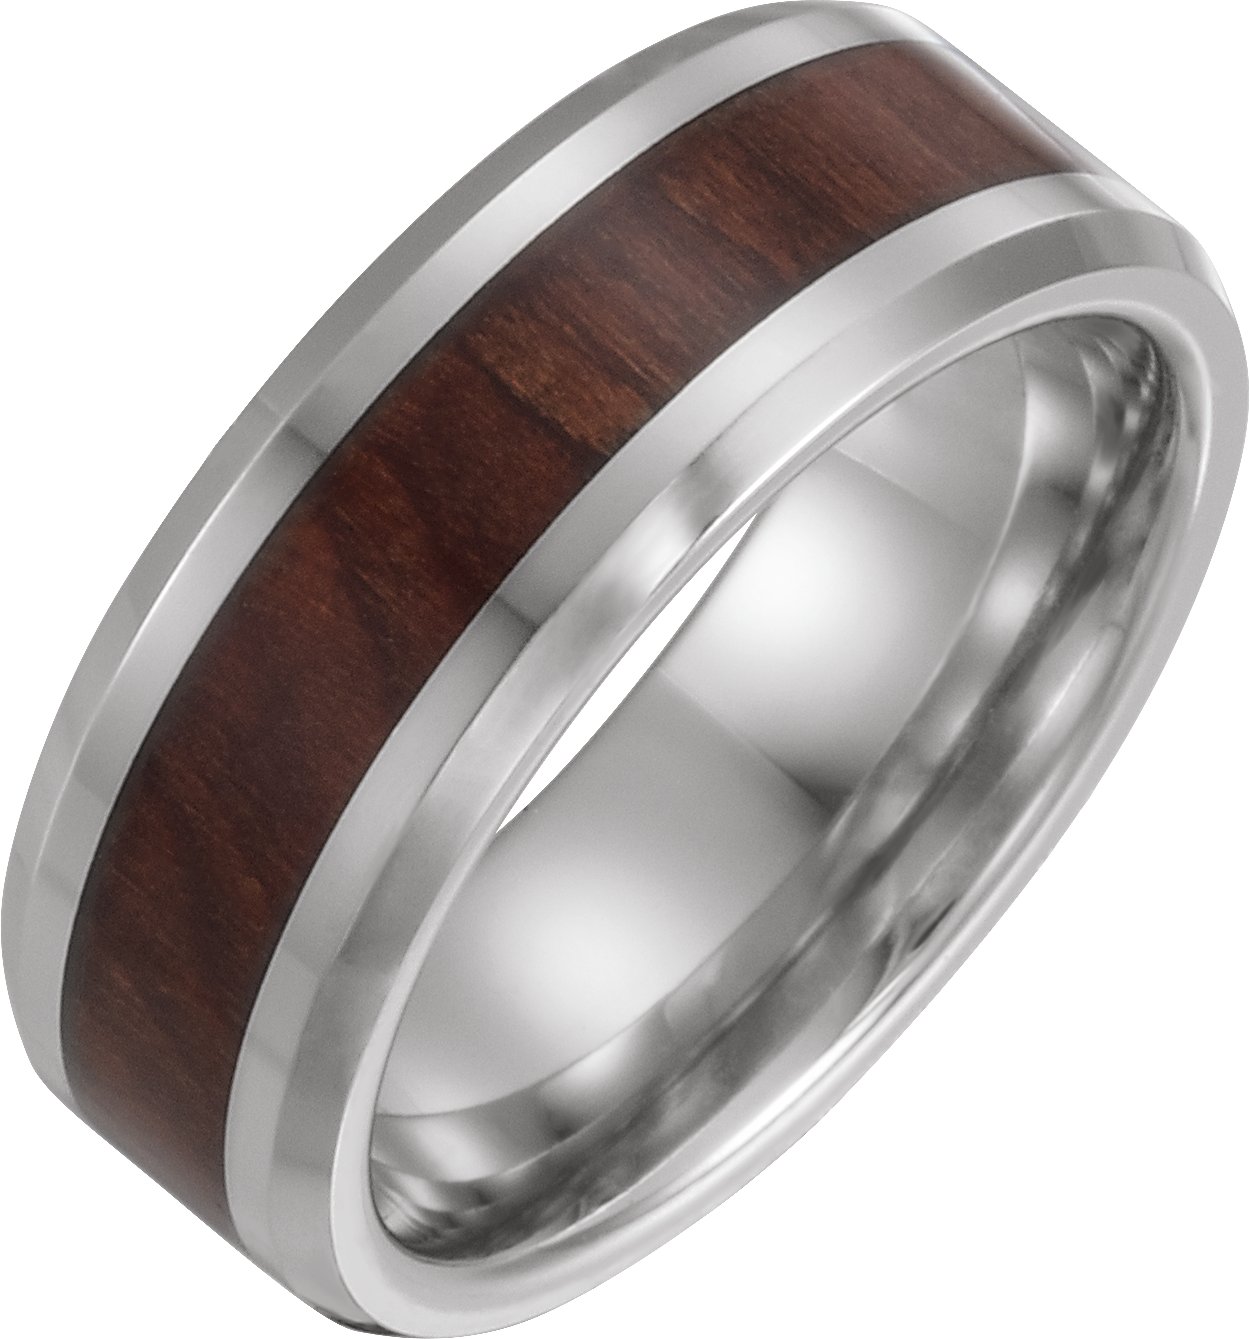 Cobalt 8 mm Beveled Edge Band with Wood Inlay Size 12 Ref 15068014